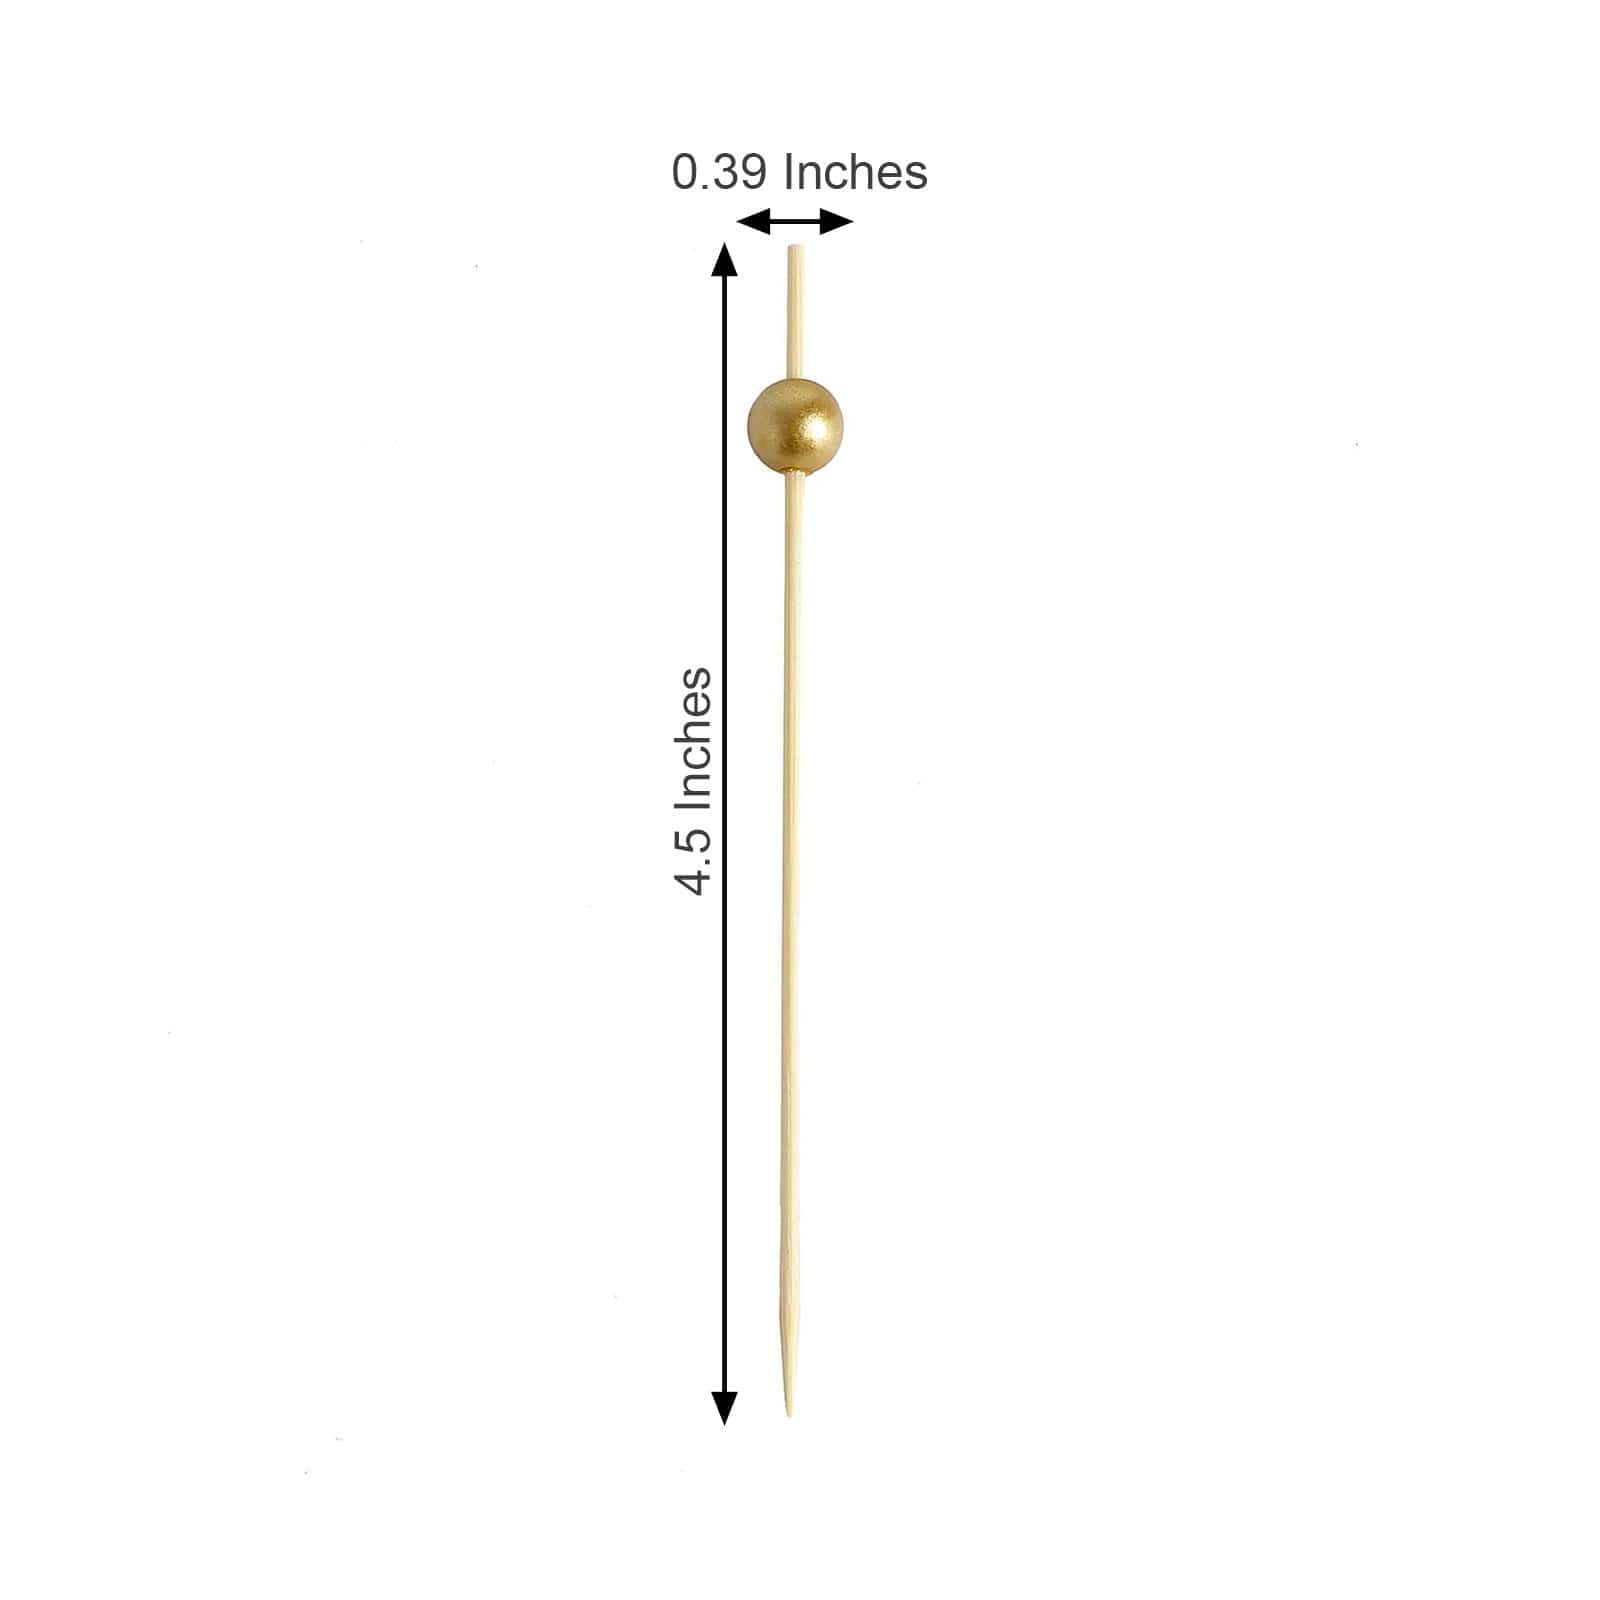 100 Light Brown 4.5 in Natural Sustainable Bamboo Skewers Cocktail Picks with Gold Pearls